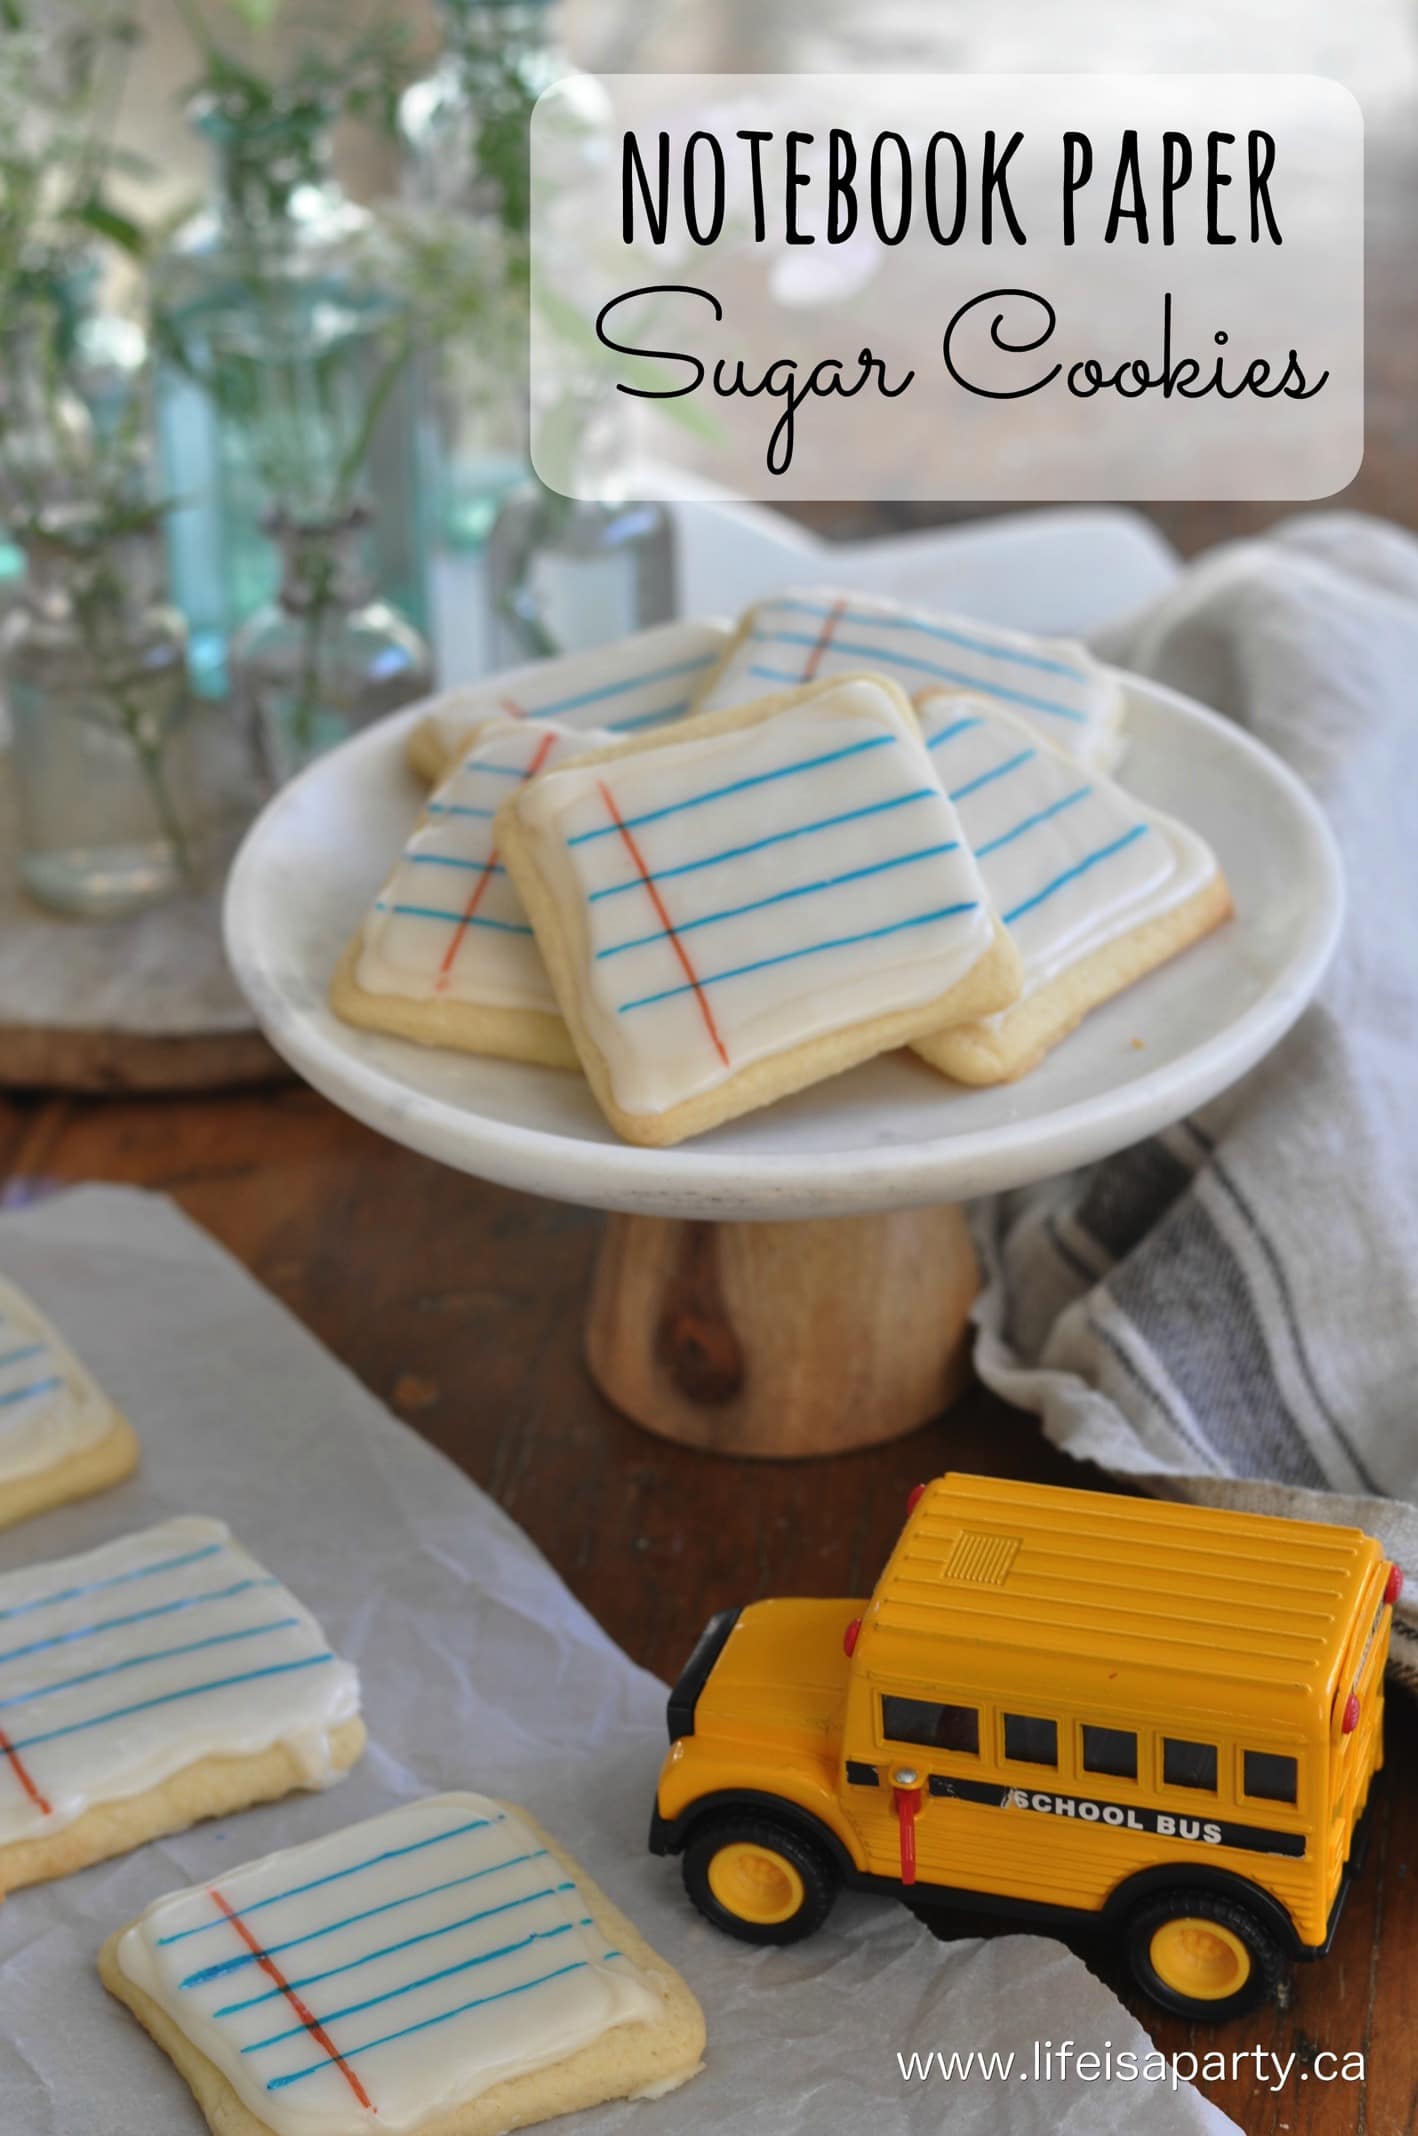 Notebook Paper Sugar Cookies for Back to School